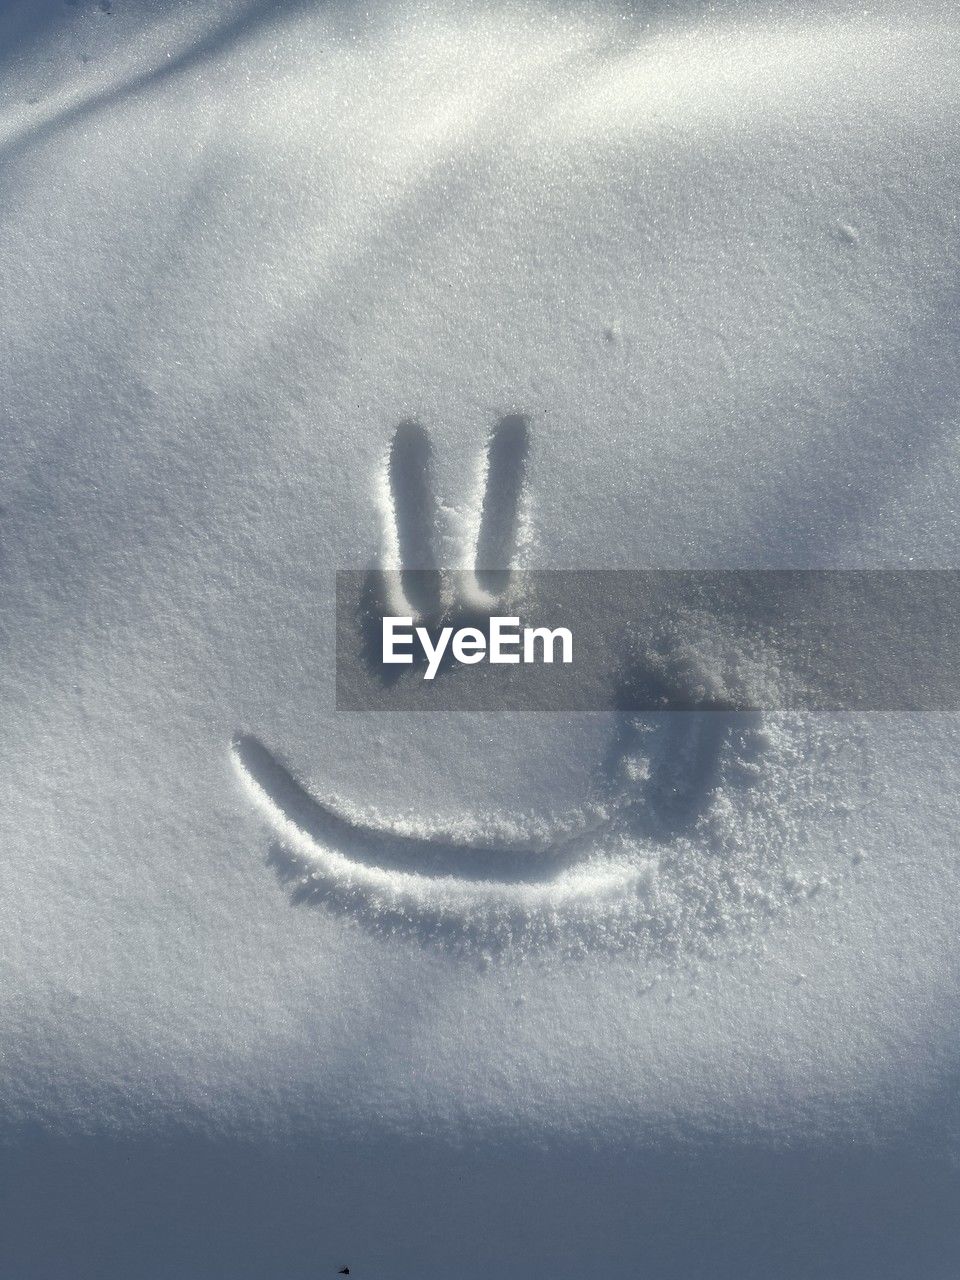 Smiley drawn on the snow. sunny winter day